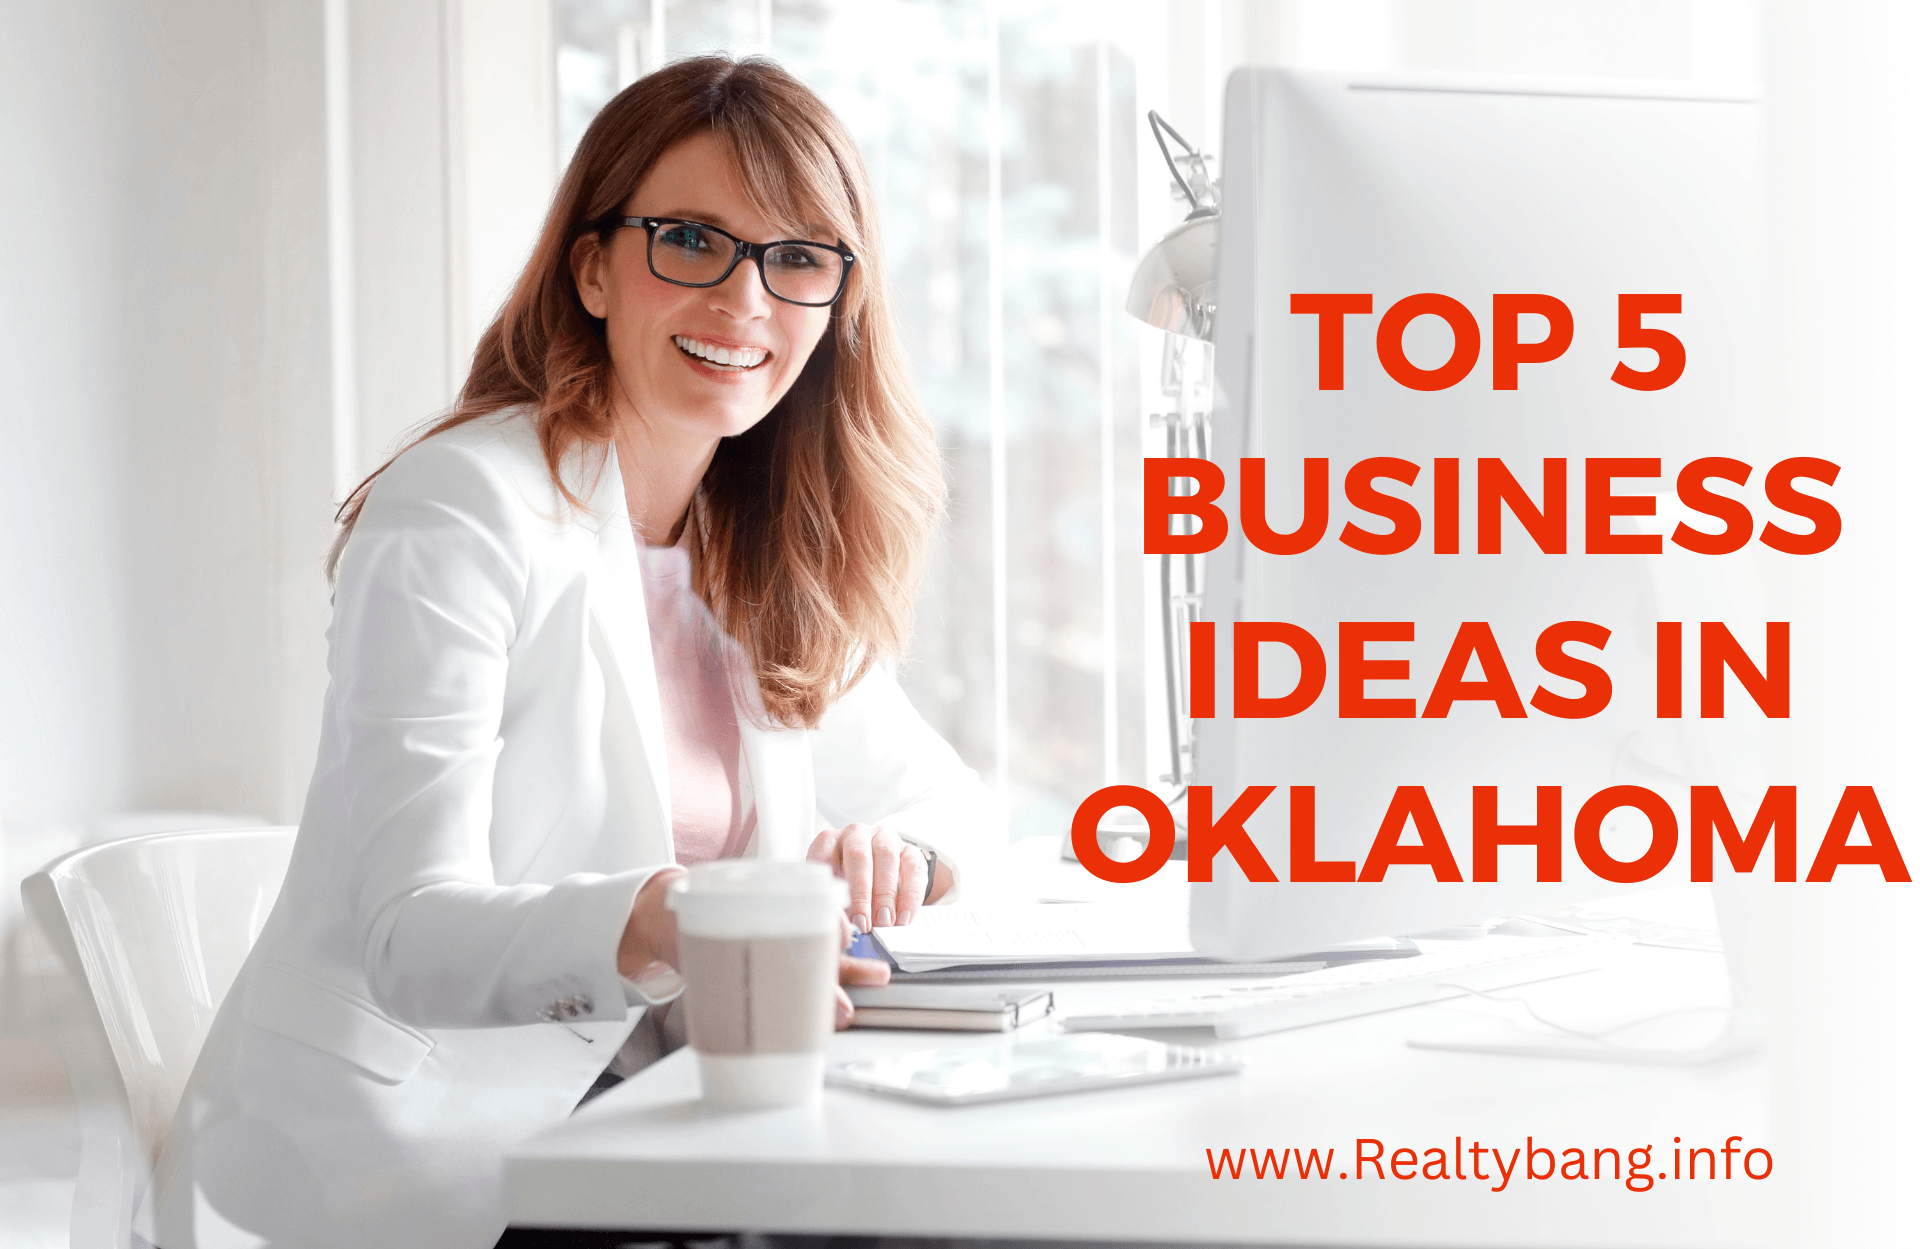 TOP 5 BUSINESS IDEAS IN OKLAHOMA